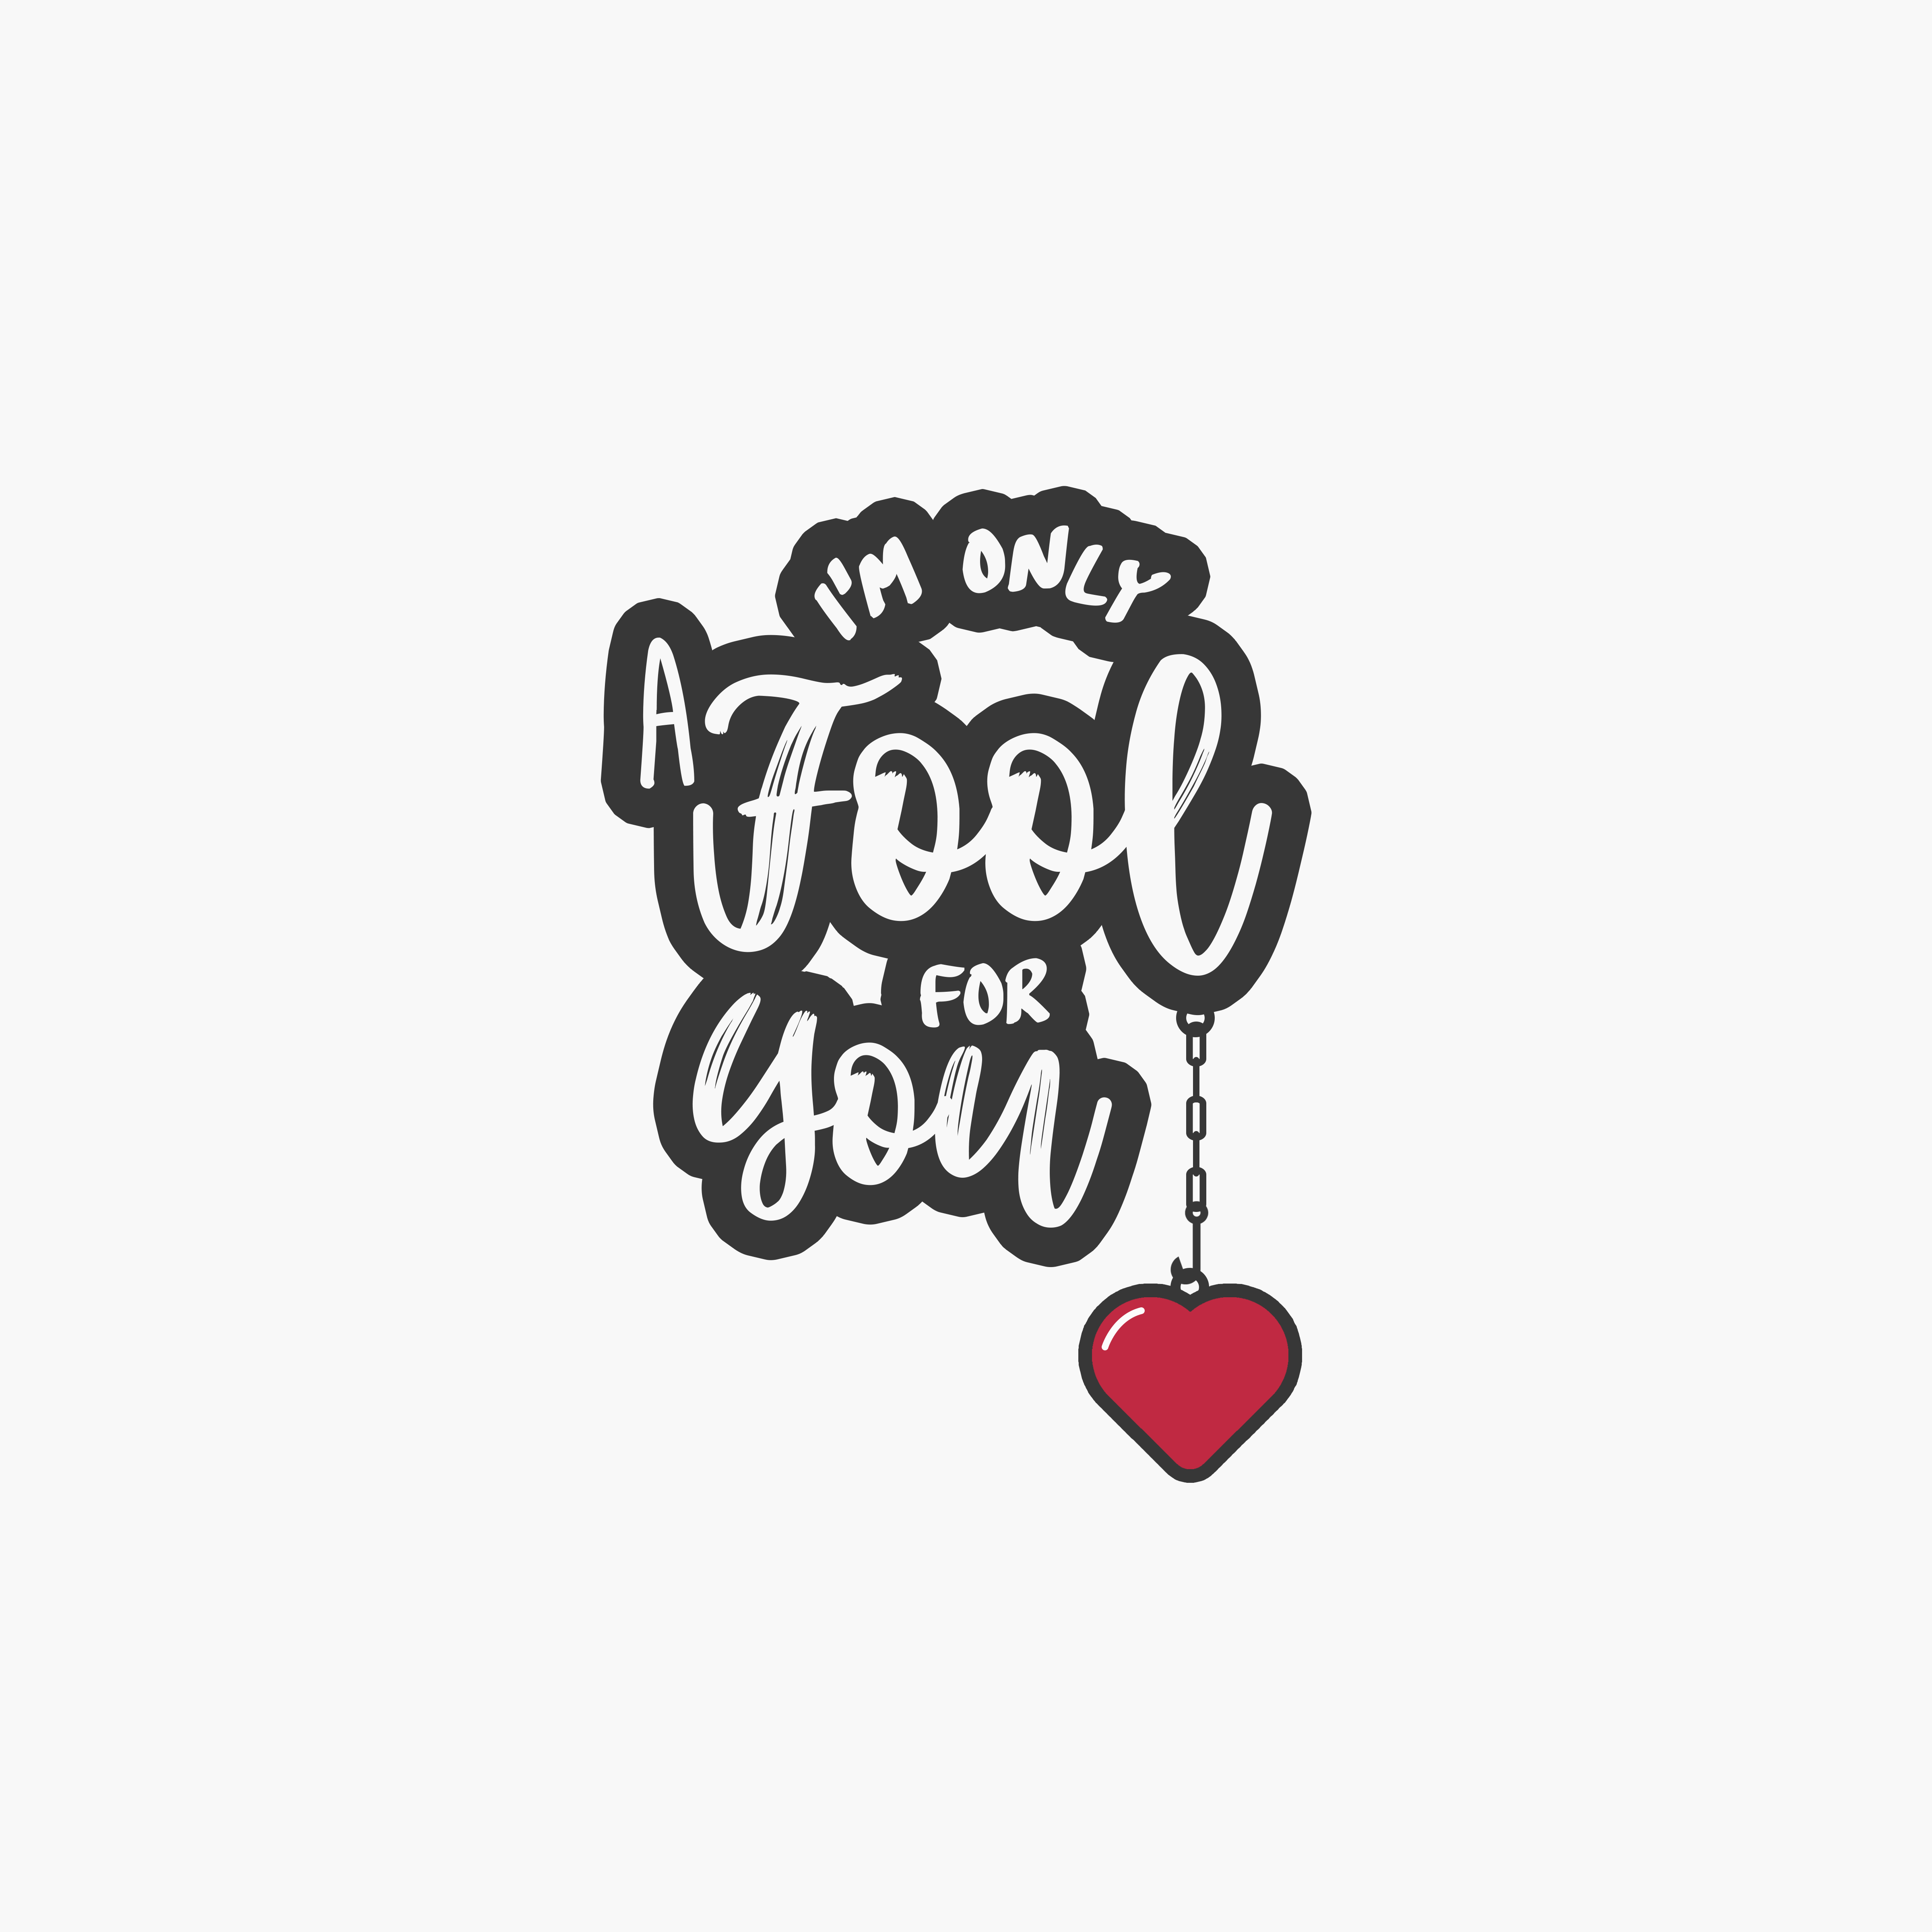 Wallpaper I'm only A Fool for You, Love quotes, Popular